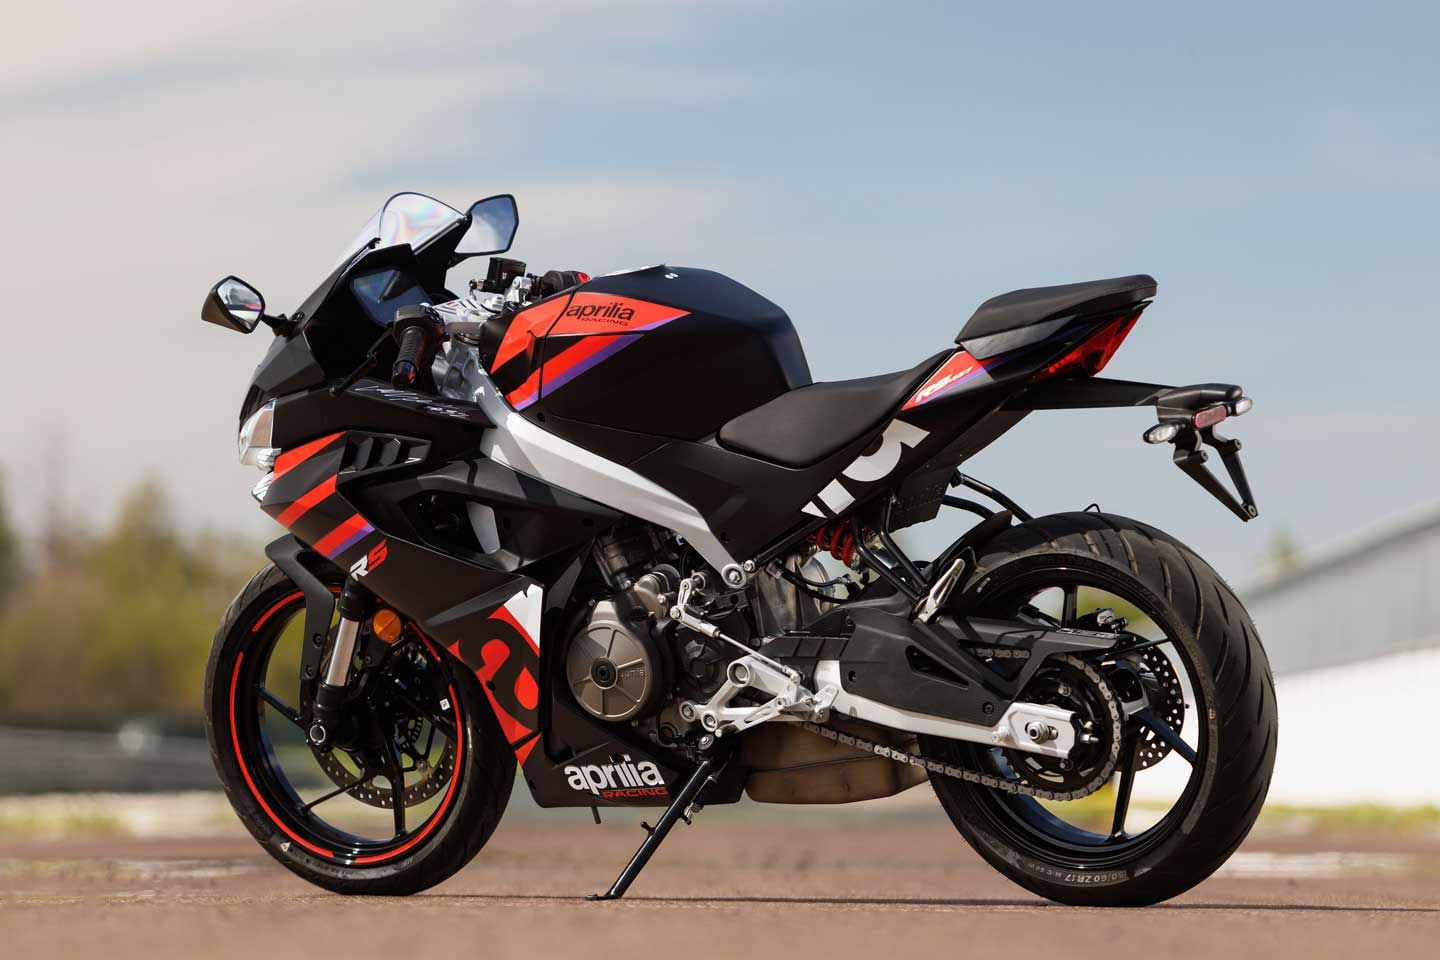 The Aprilia RS 457 has a 53.1-inch wheelbase, 34.2-inch seat height, and weighs a claimed 385 pounds.